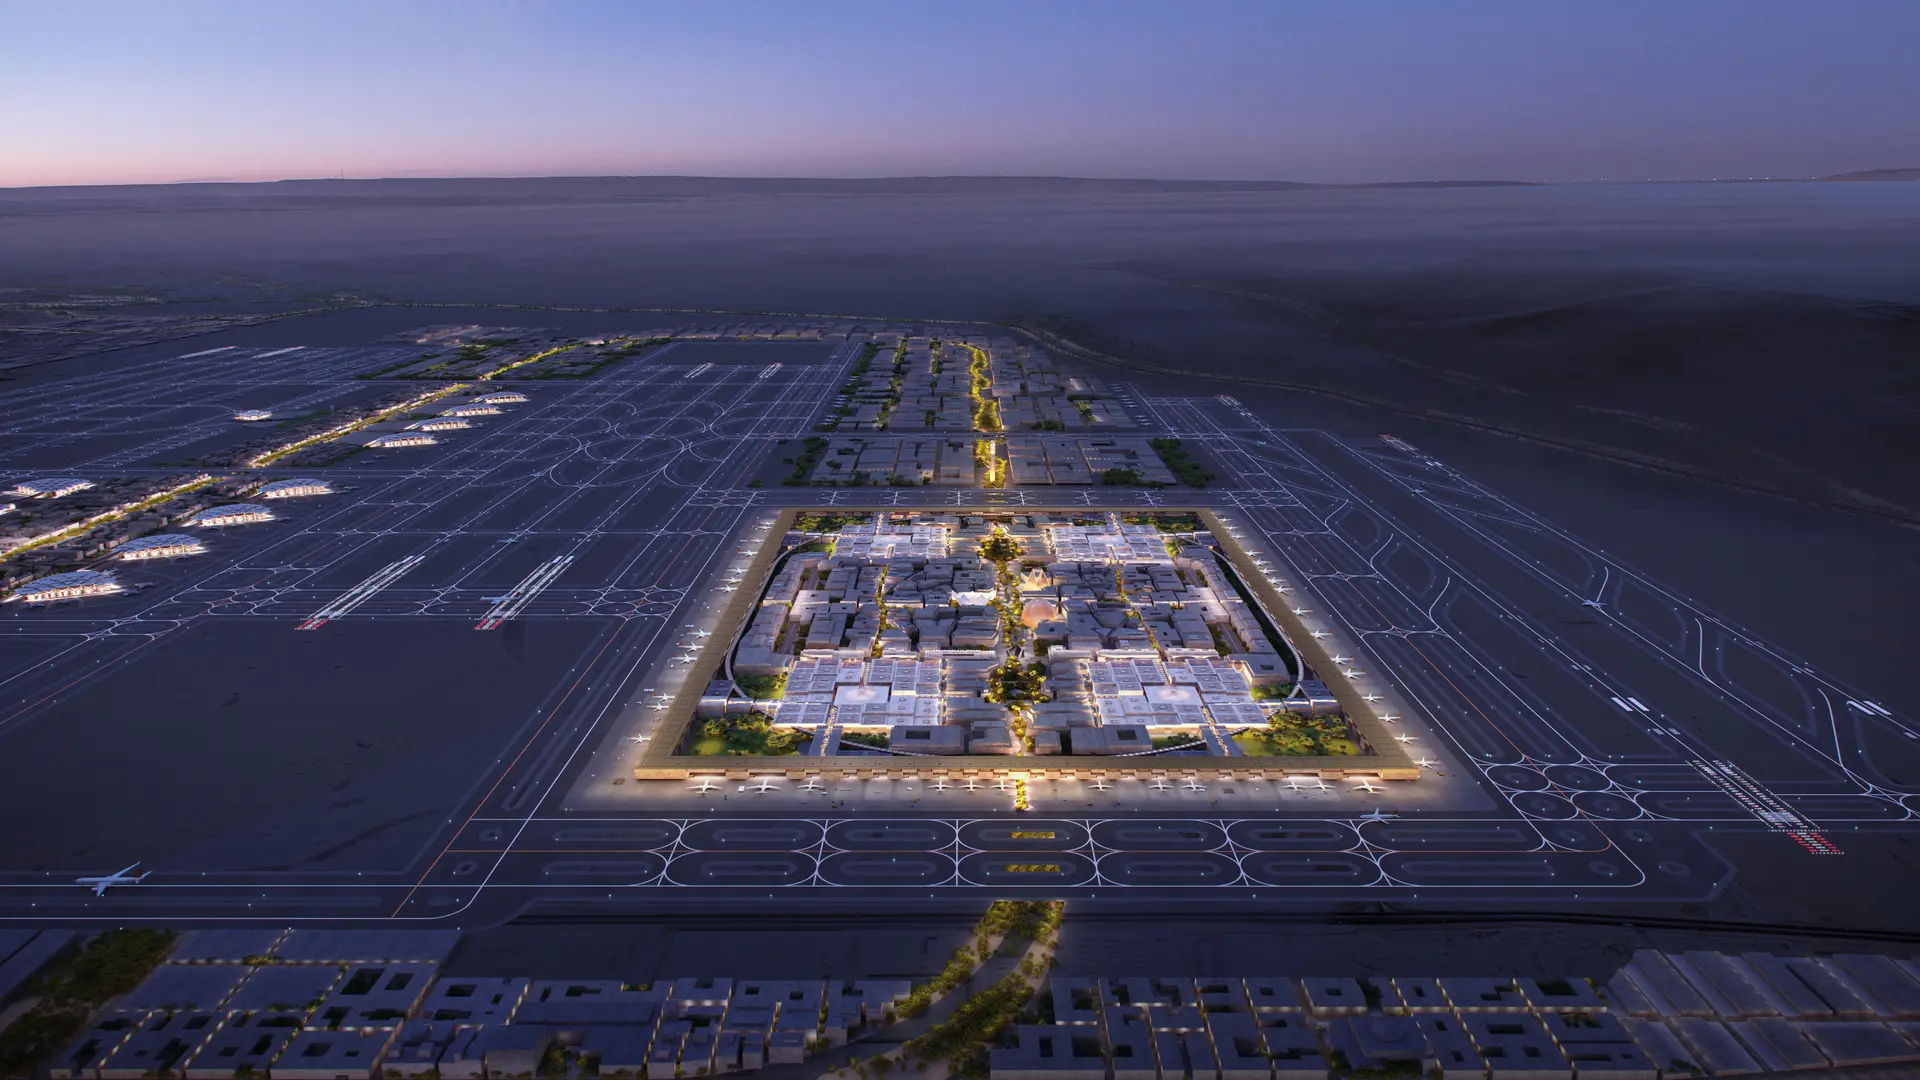 New King Salman International Airport Designs Unveiled by Foster+Partners - Arch2O.com